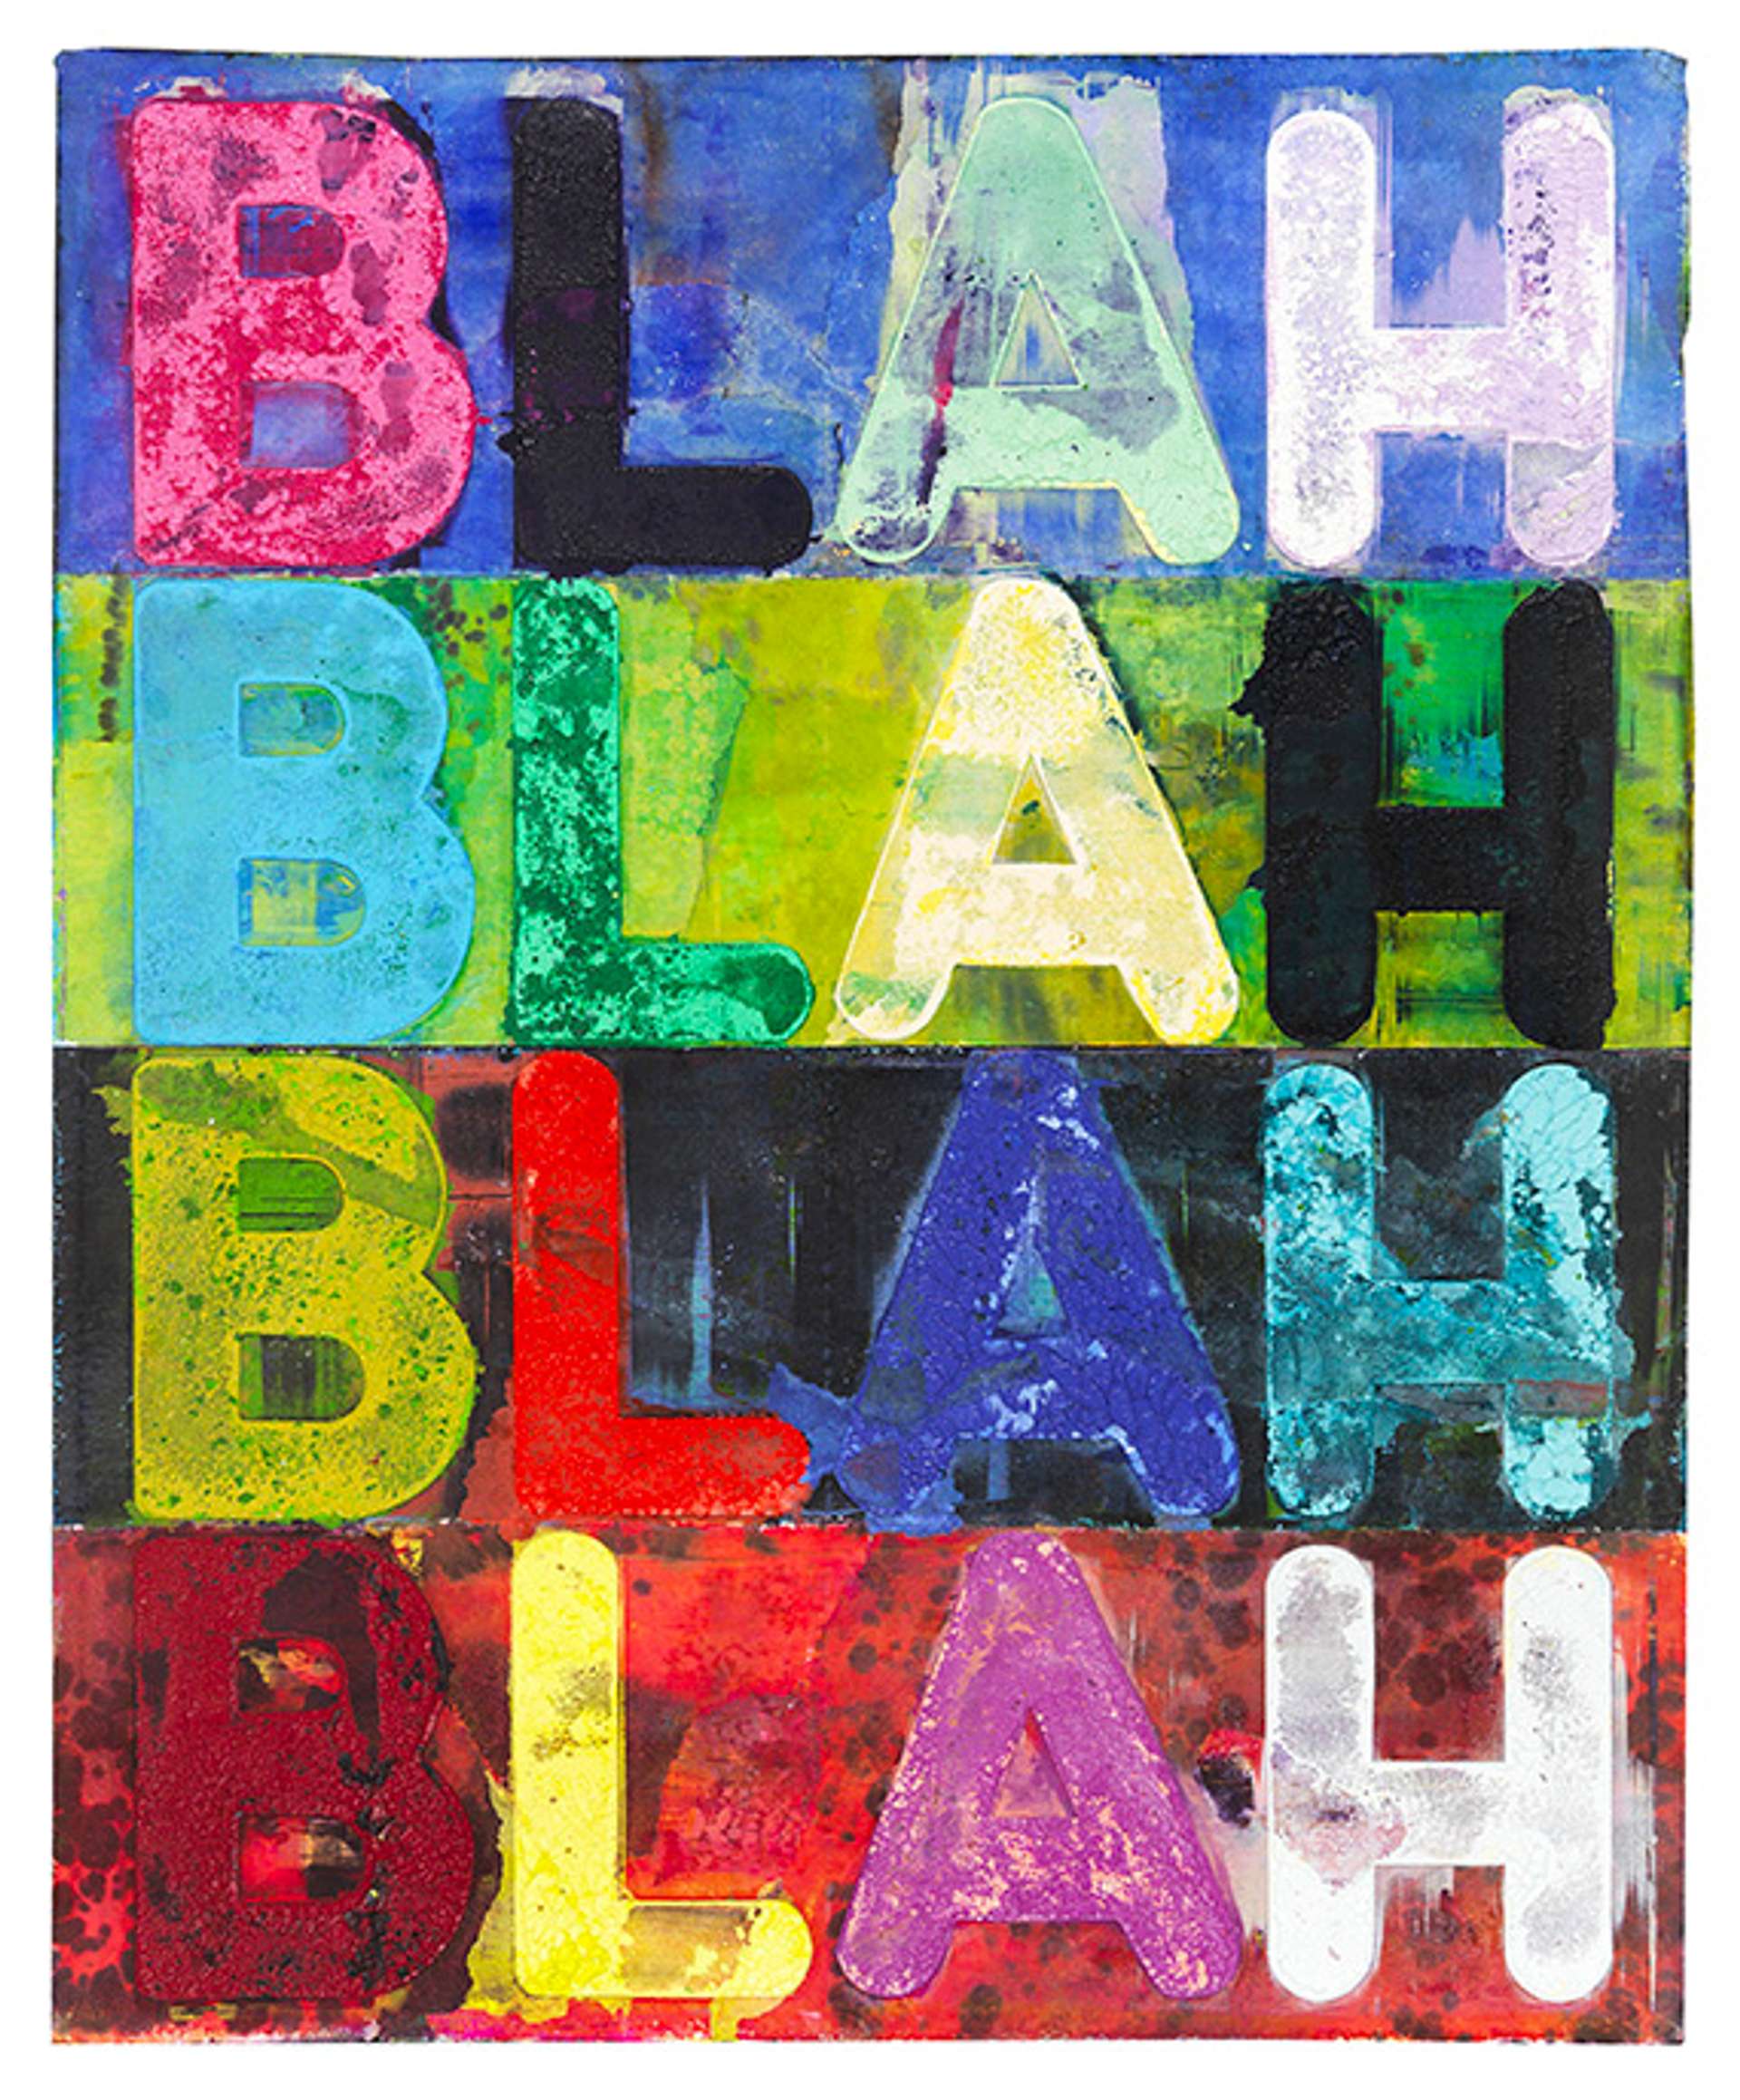 Four horizontal rows of large, uniformly sized letters spell out the word "BLAH" in different vibrant colours. The distinct colours of each row create a visually striking and harmonious composition.